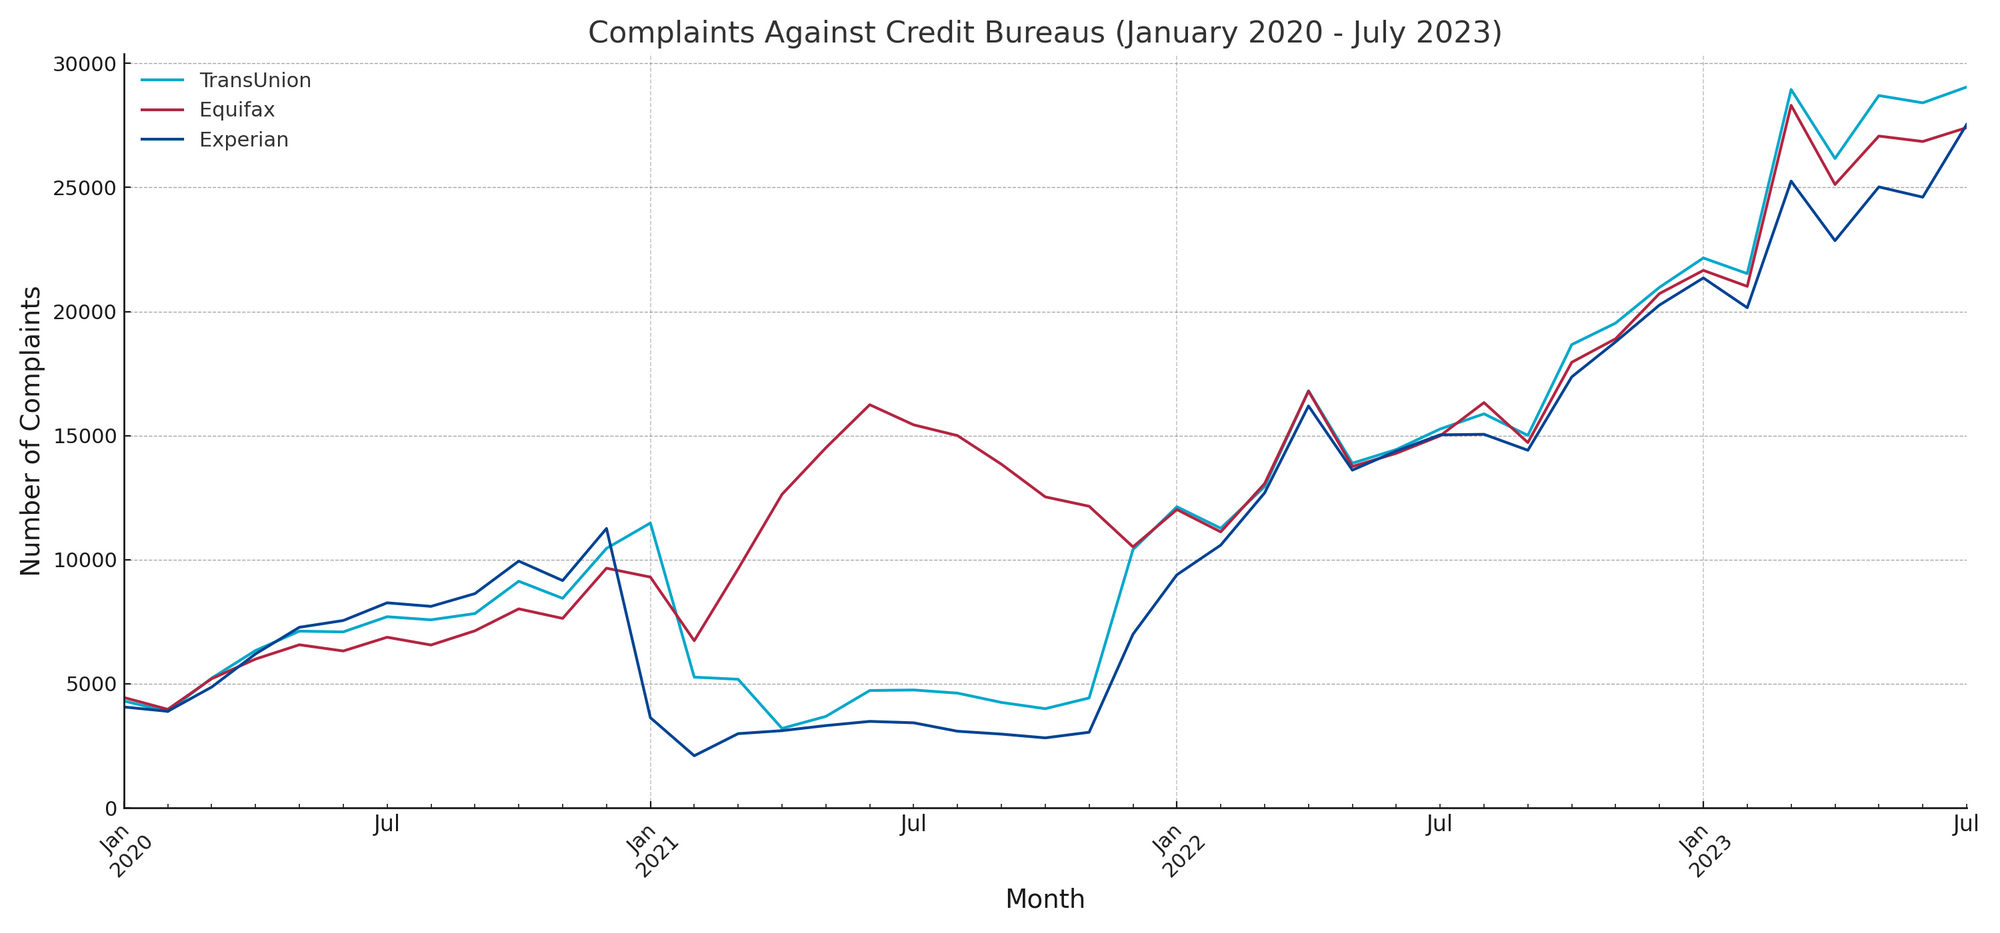 A chart showing the number of complaints by month from January 2020 to July 2023.